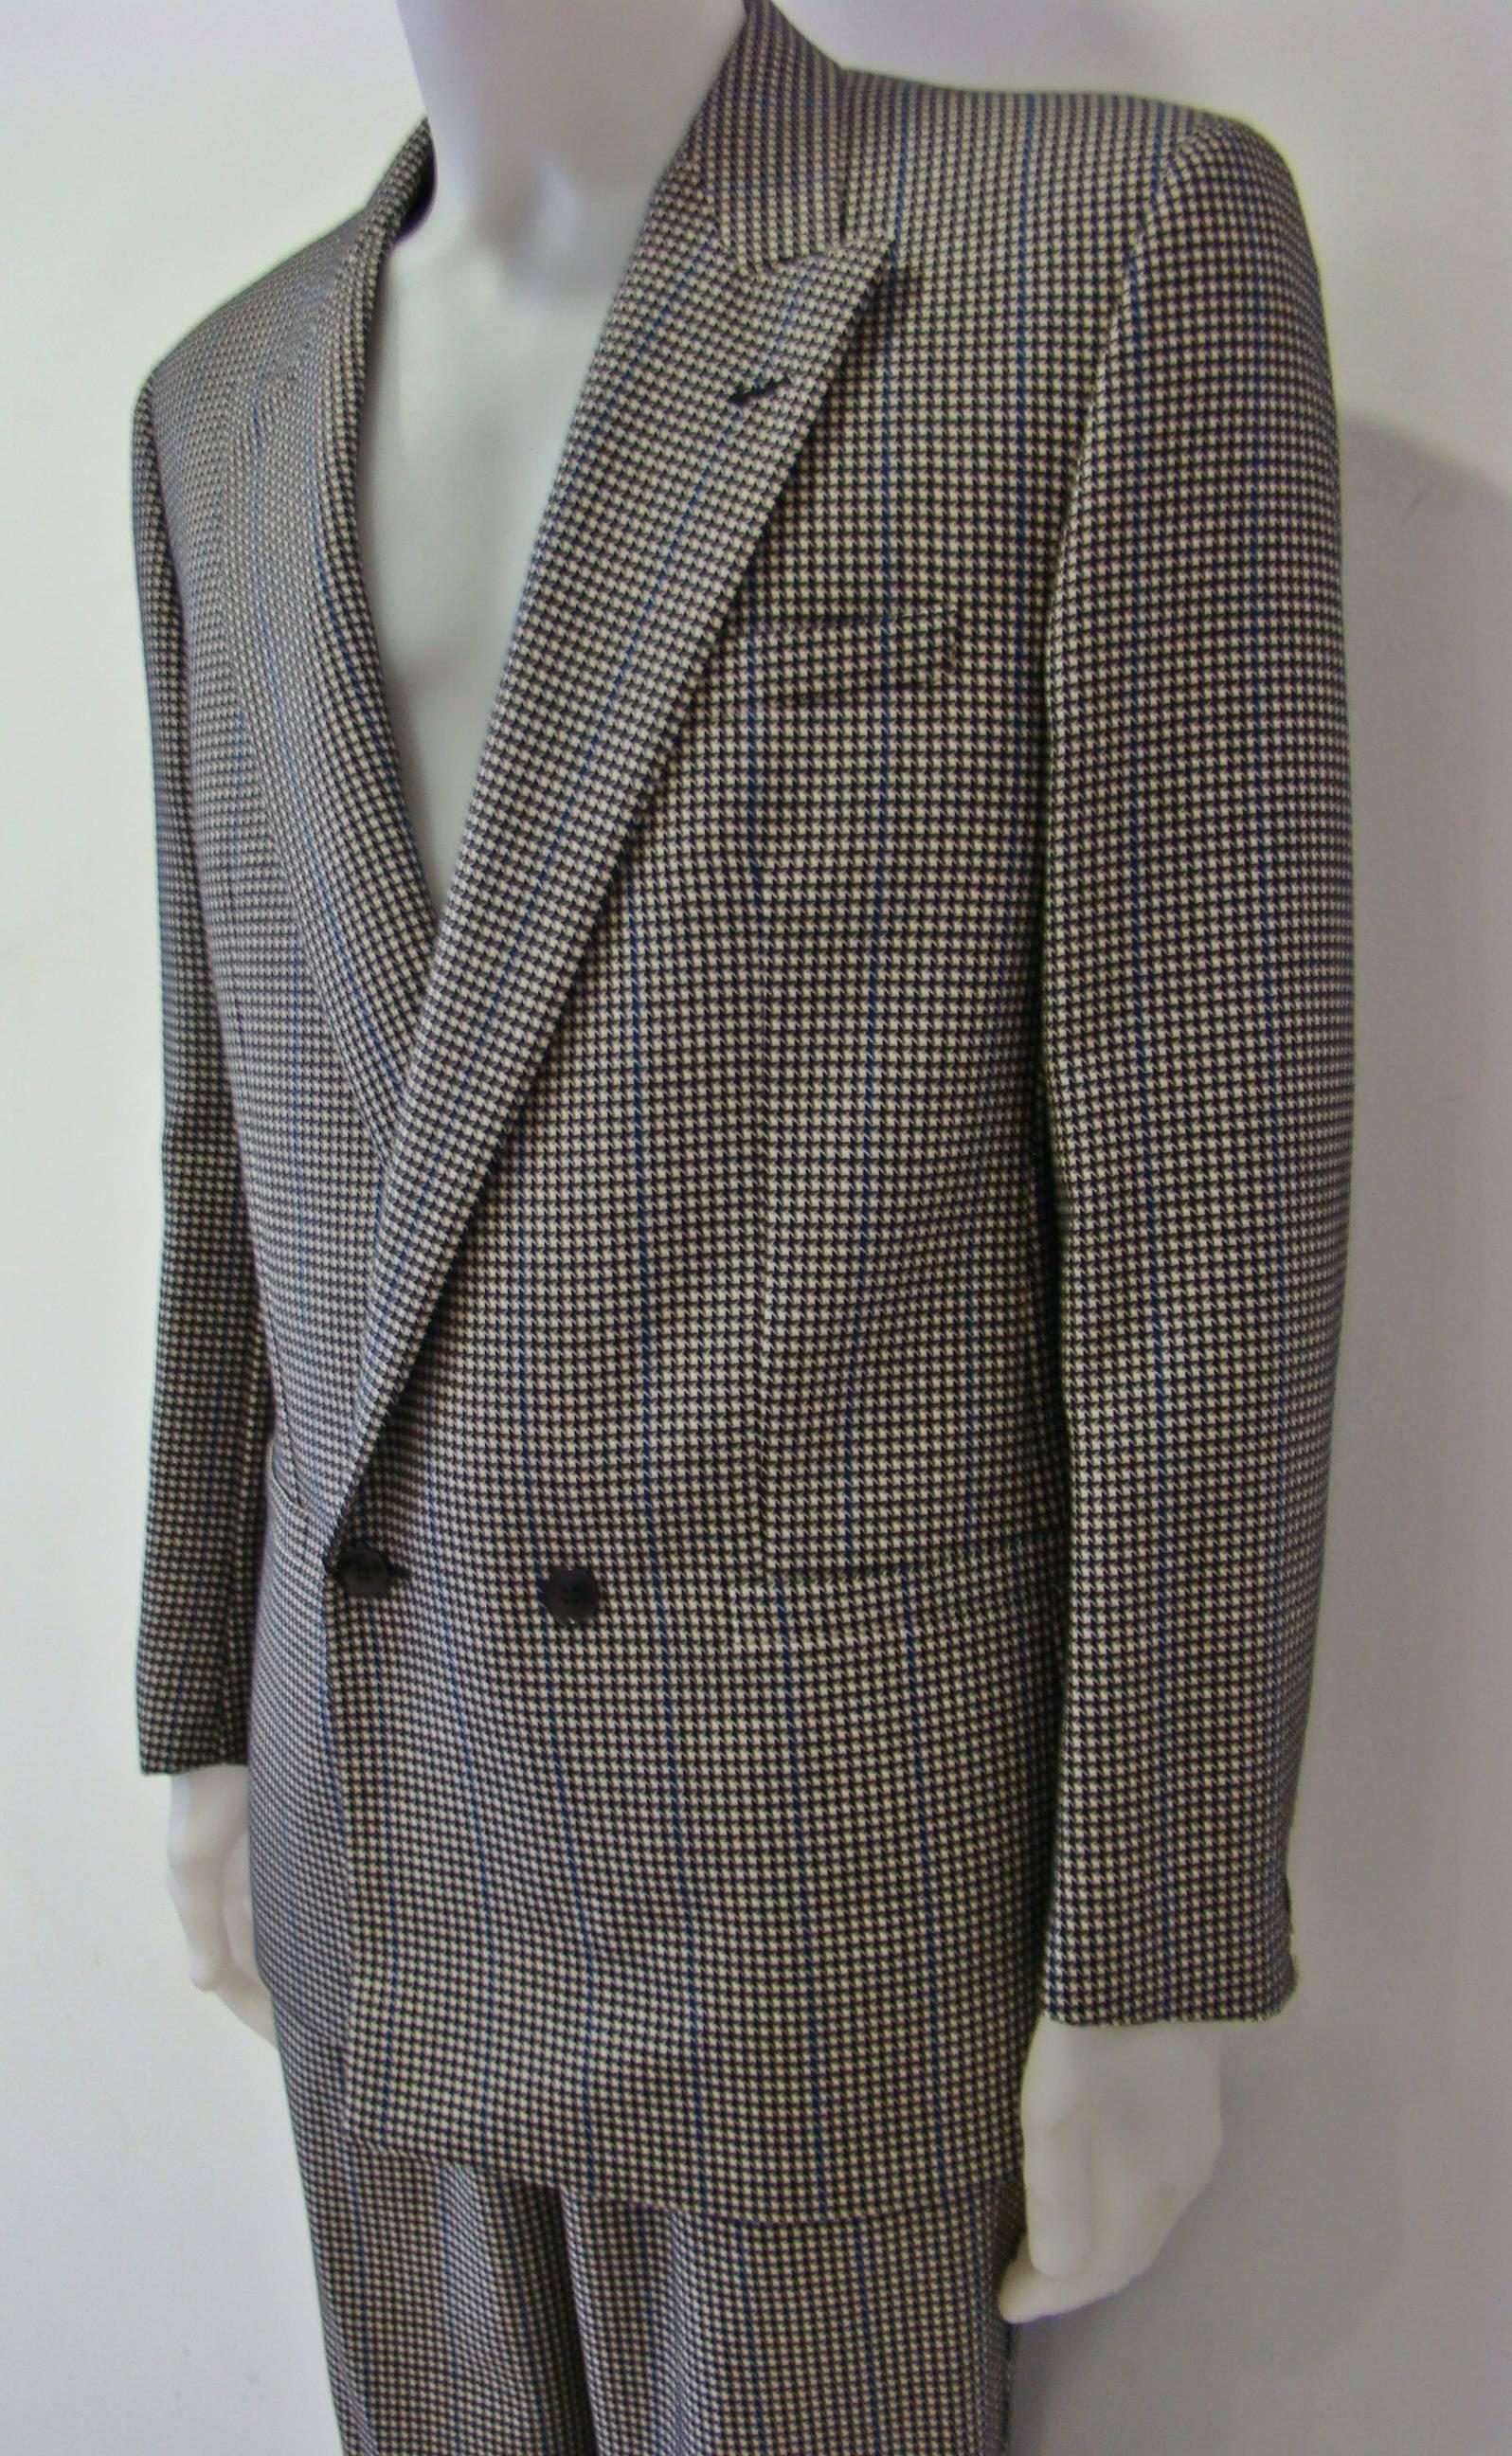 A Rare Suit From Gianni Versace Featuring A Pied De Poule Design. 100%Wool Suit. A Double Breasted Jacket With A Classic Collar, Two Front Welt Pockets And A Broad Welt Chest Pocket Combined With Long Pied De Poule Trousers.